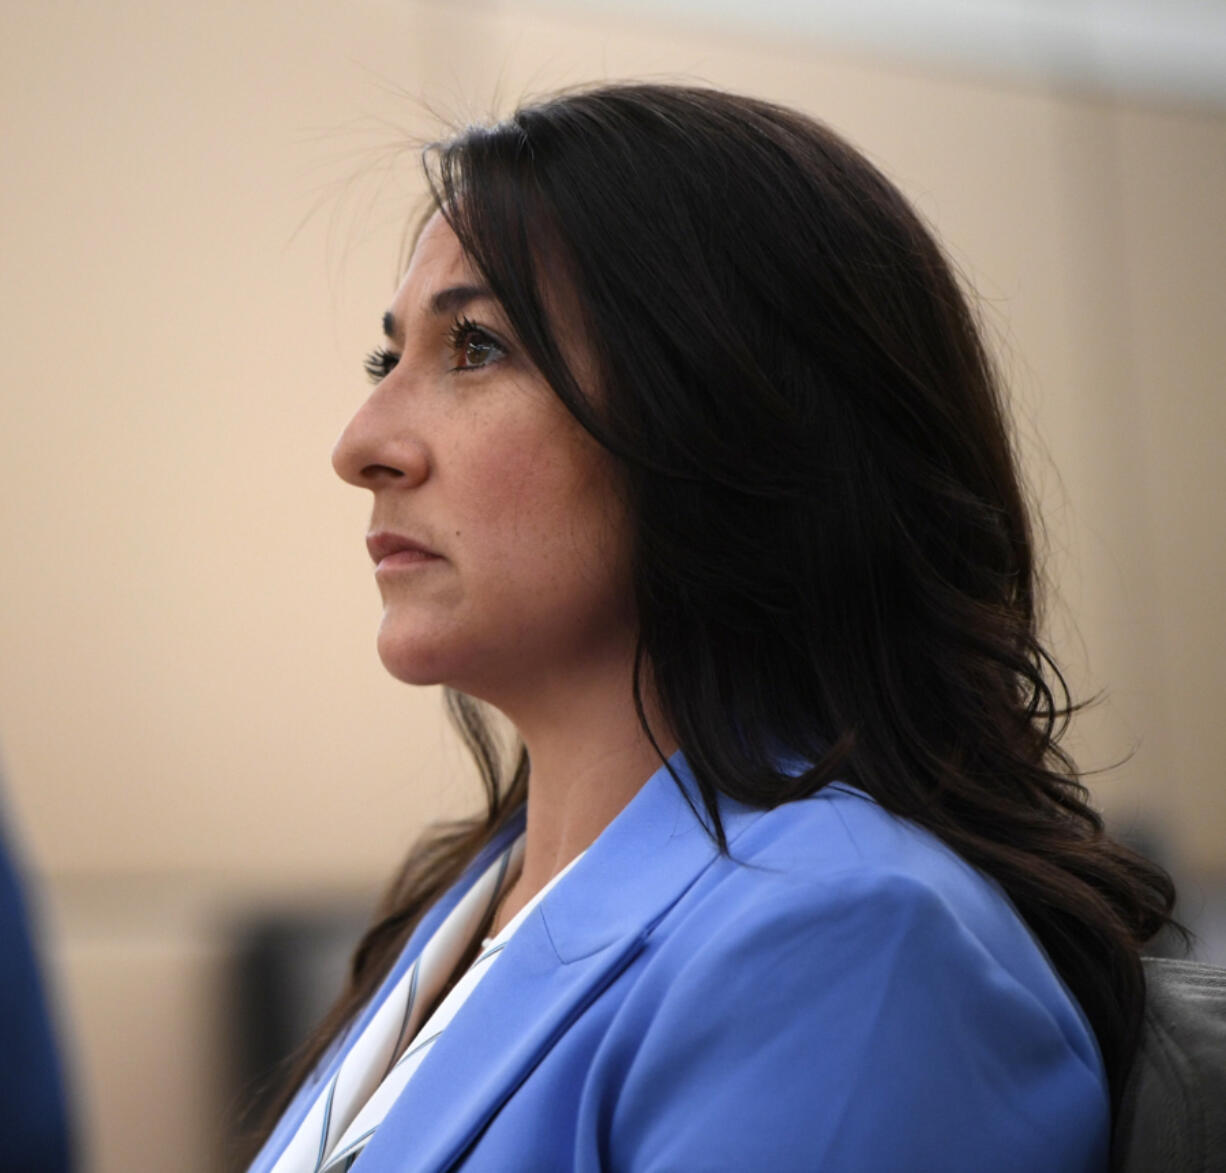 Vancouver police Officer Andrea Mendoza watches her body camera footage Monday during closing arguments in her misdemeanor assault trial in Clark County District Court. Mendoza faced the assault charge after threatening to use her Taser on the genitals of a suspected shoplifter in May.